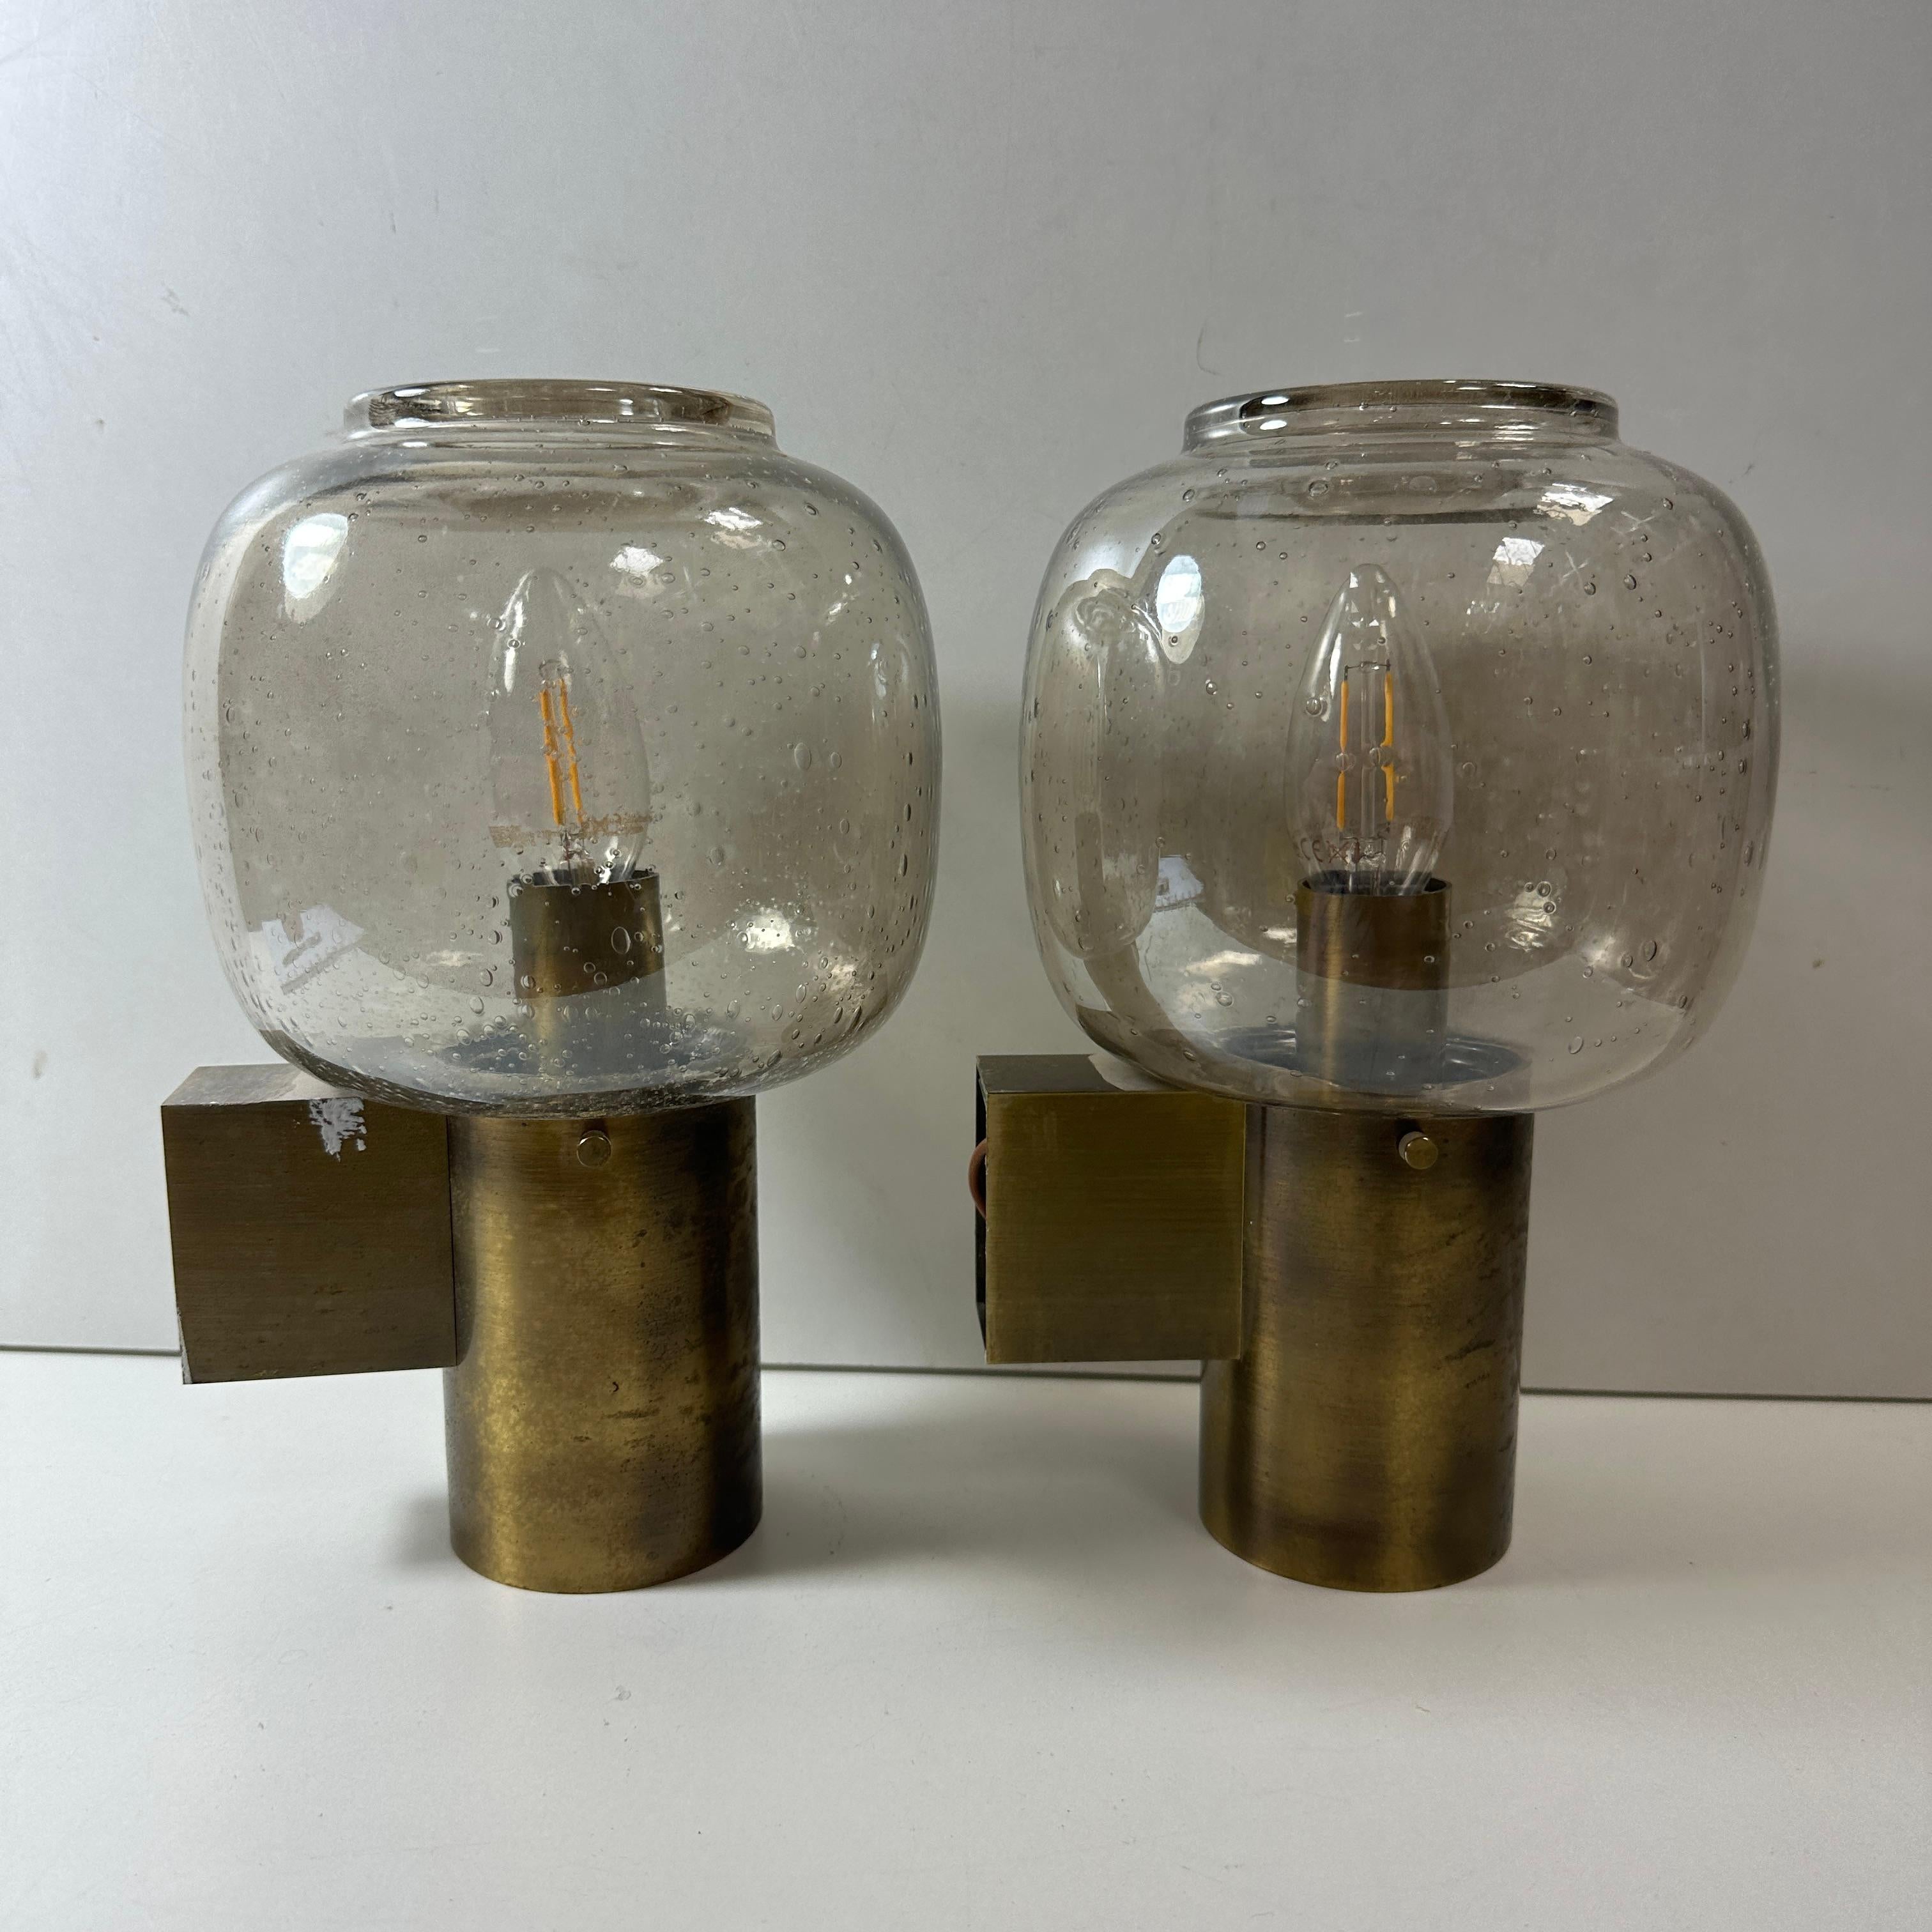 Pair of 1960s Wall Sconces in the Style of Hans - Agne Jakobsson, Skandinavia For Sale 8